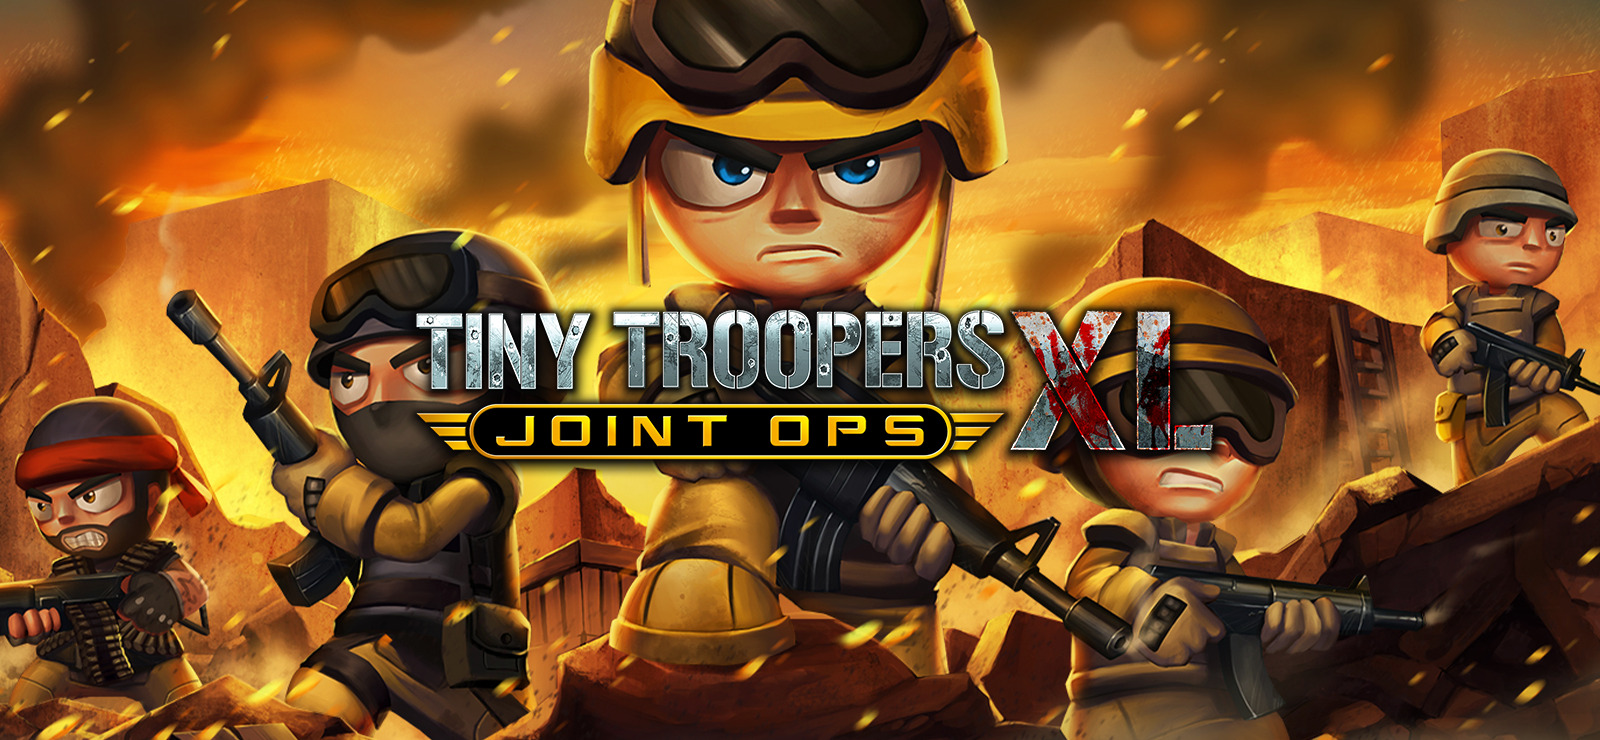 Tiny Troopers Joint Ops XL free downloads